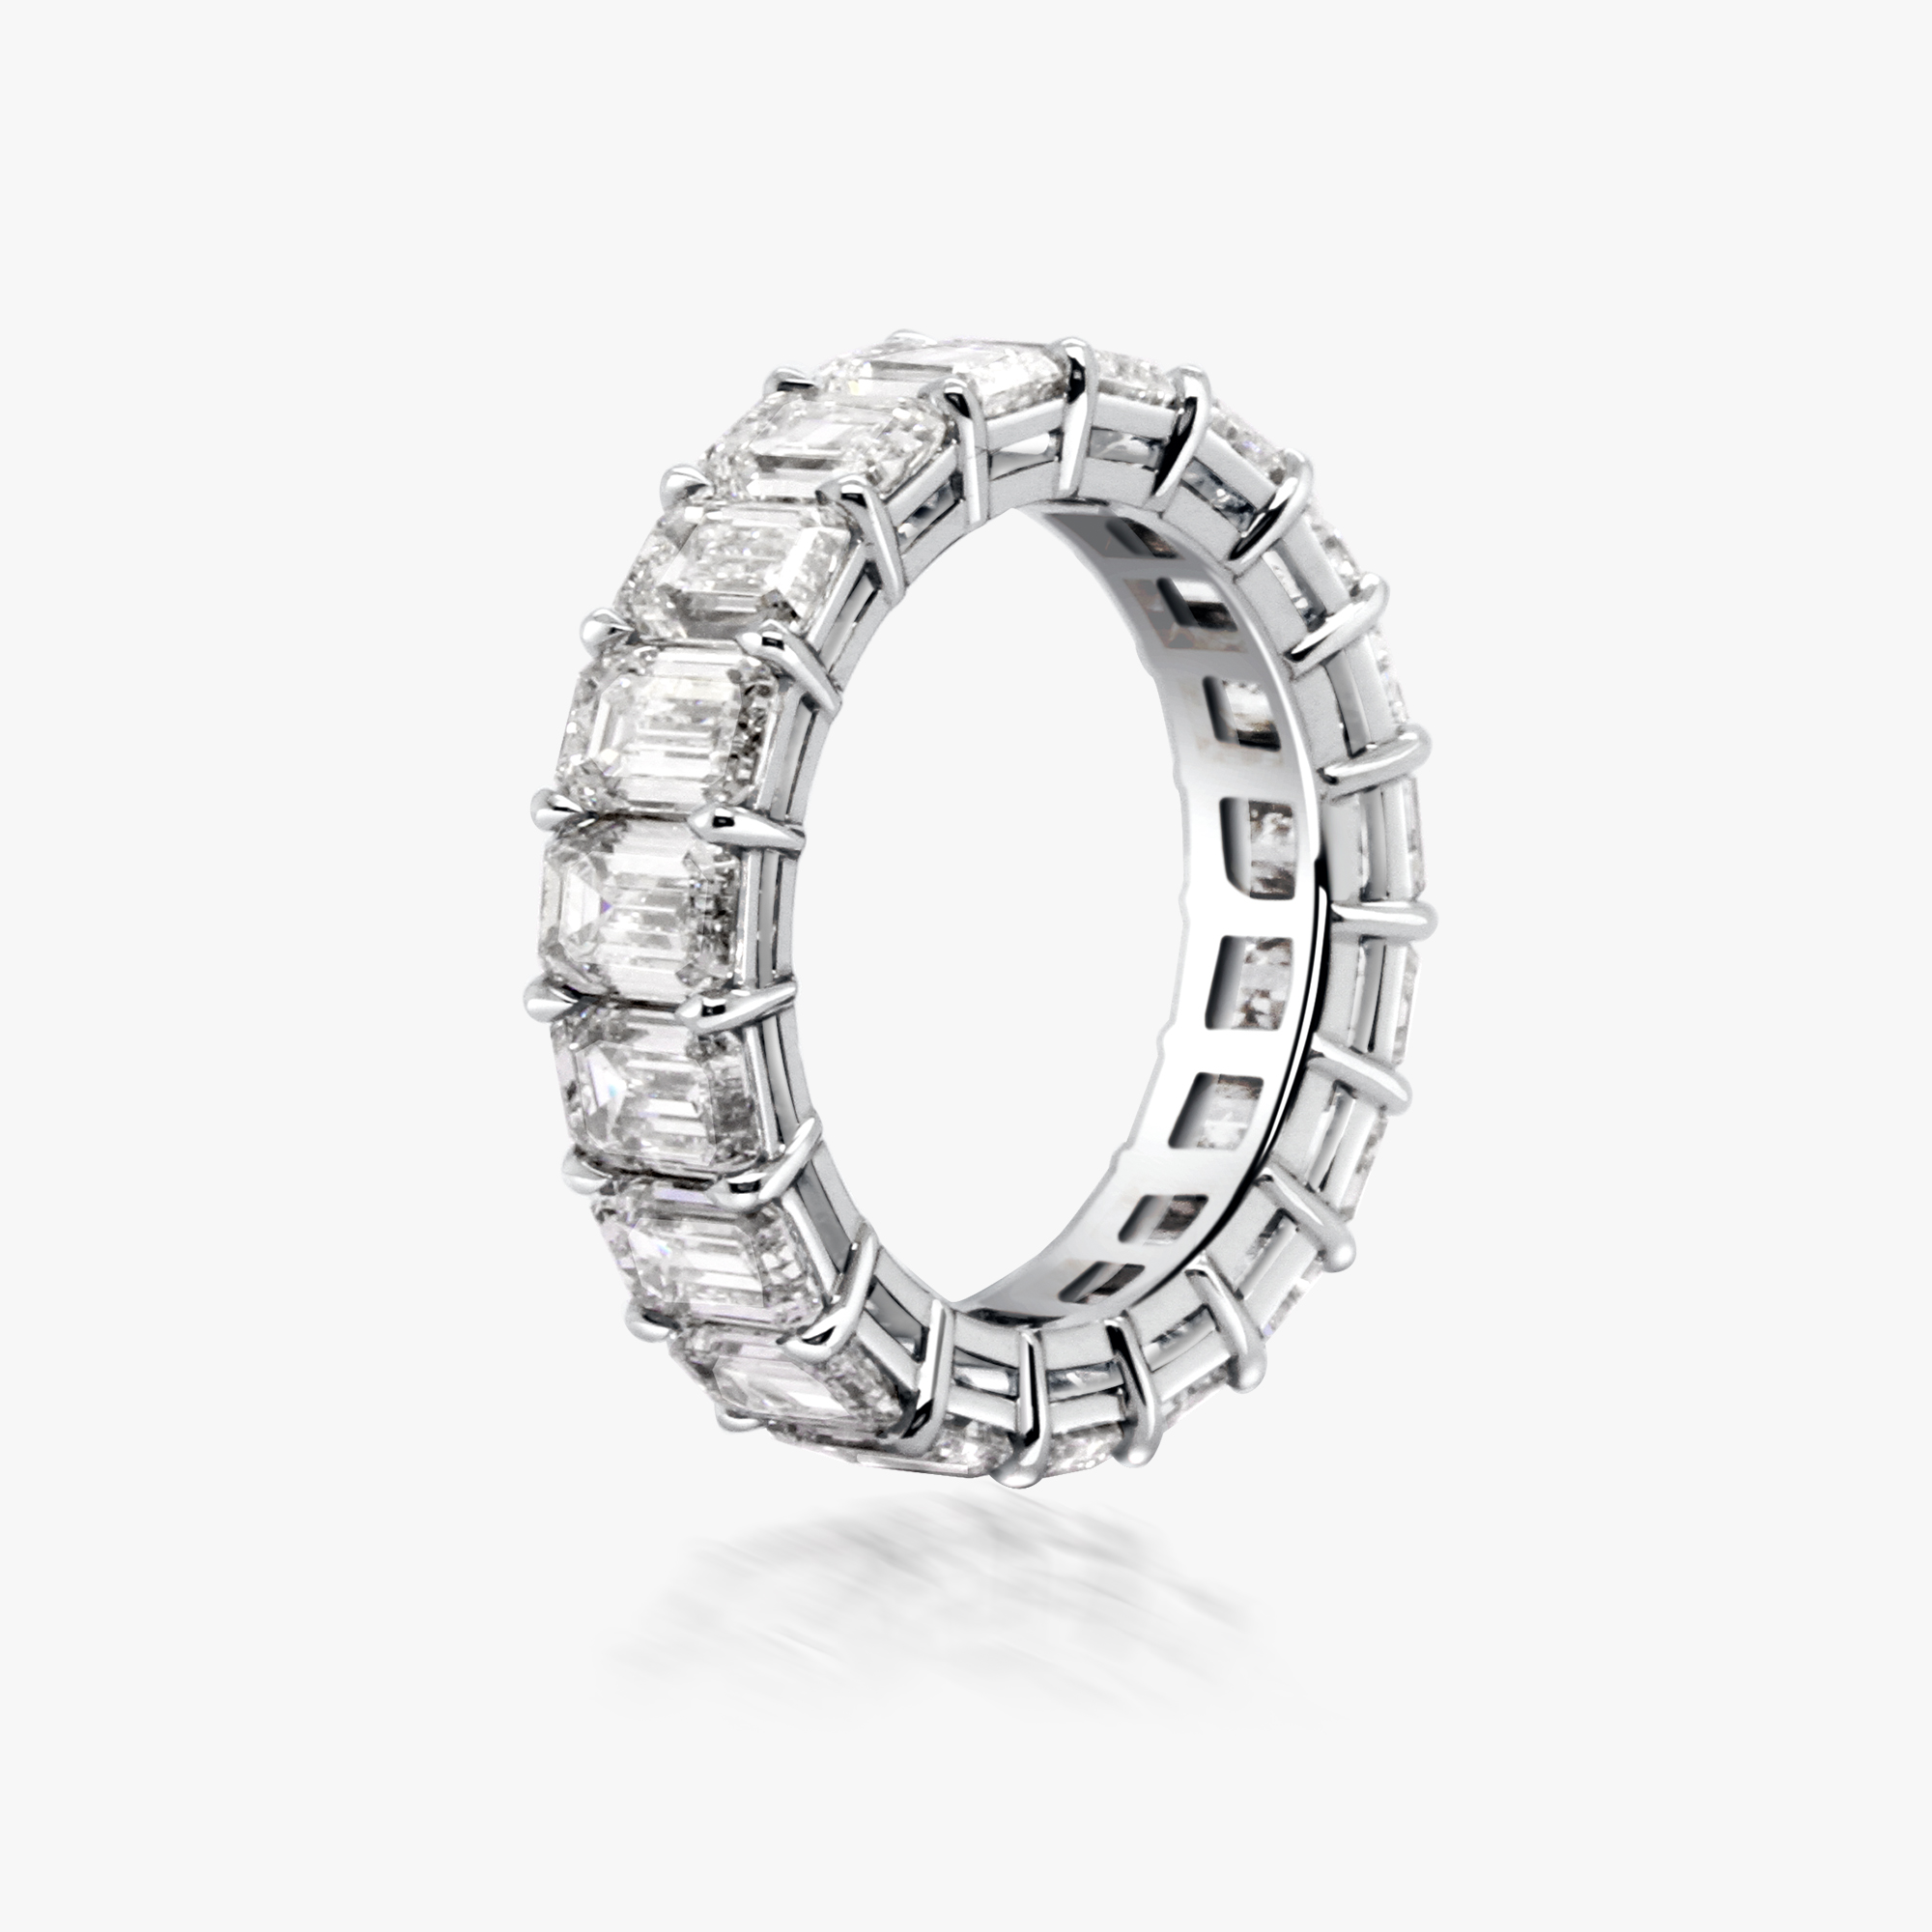 ACCA PT950 Ring with Emerald Cut Diamond